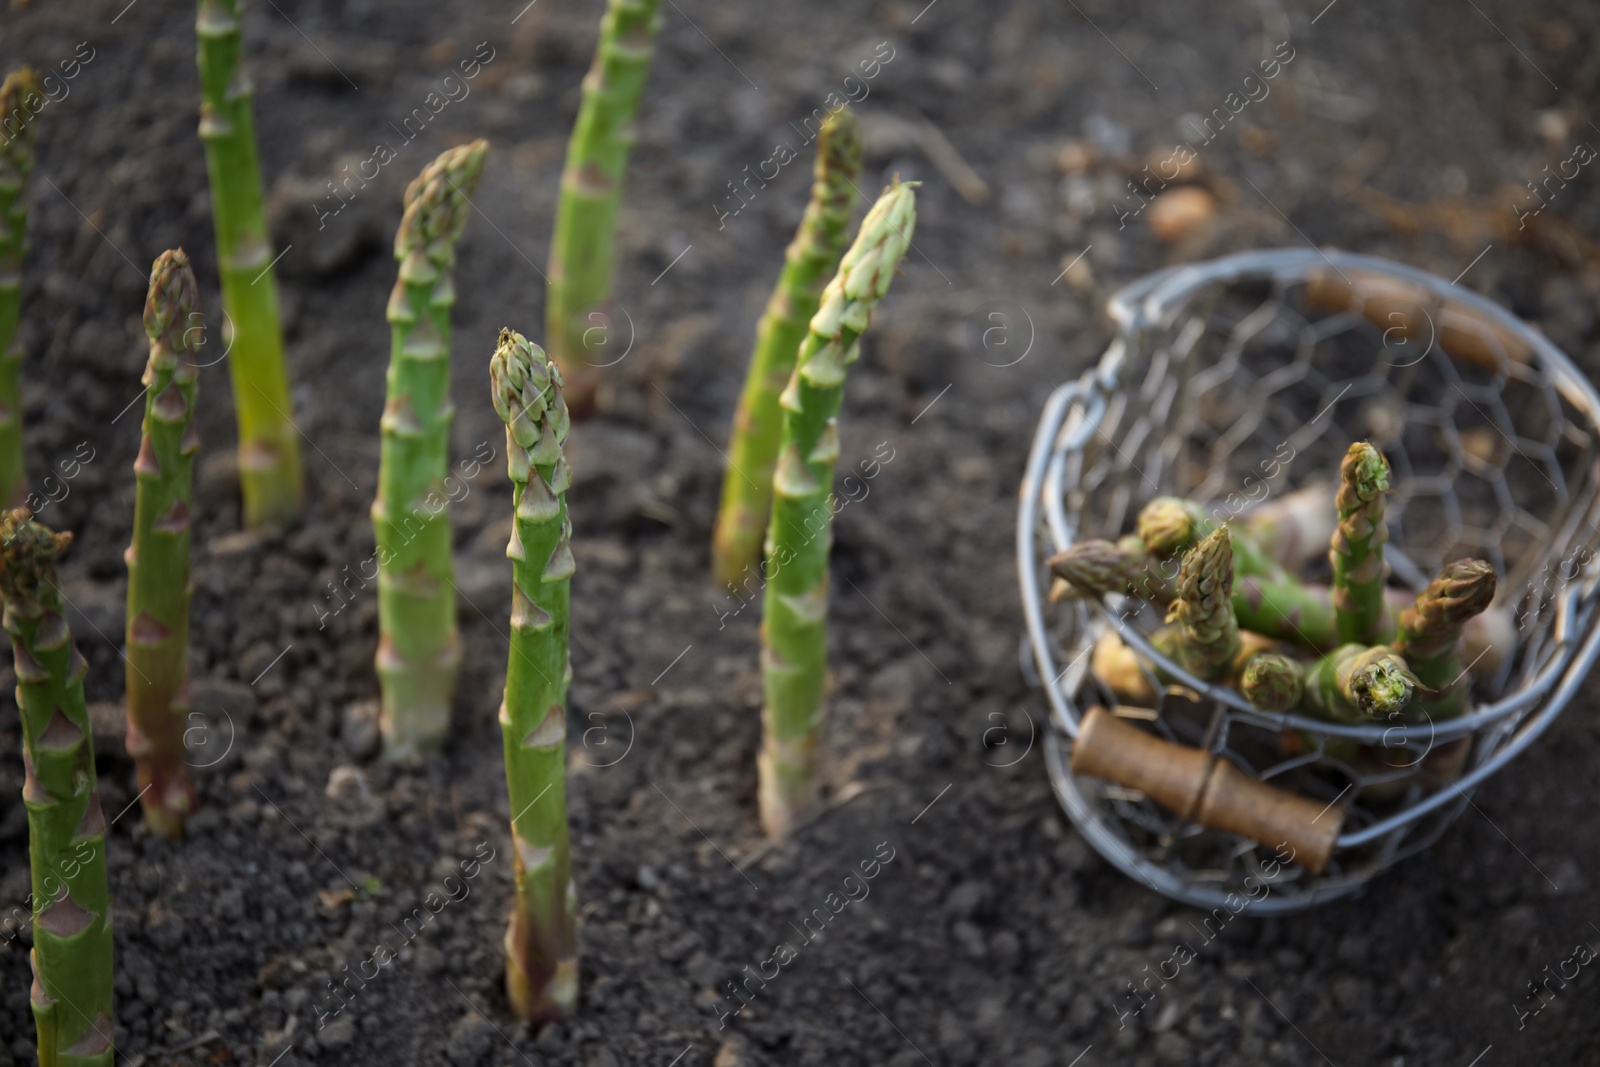 Photo of Metal basket with fresh asparagus near growing plants in field, closeup